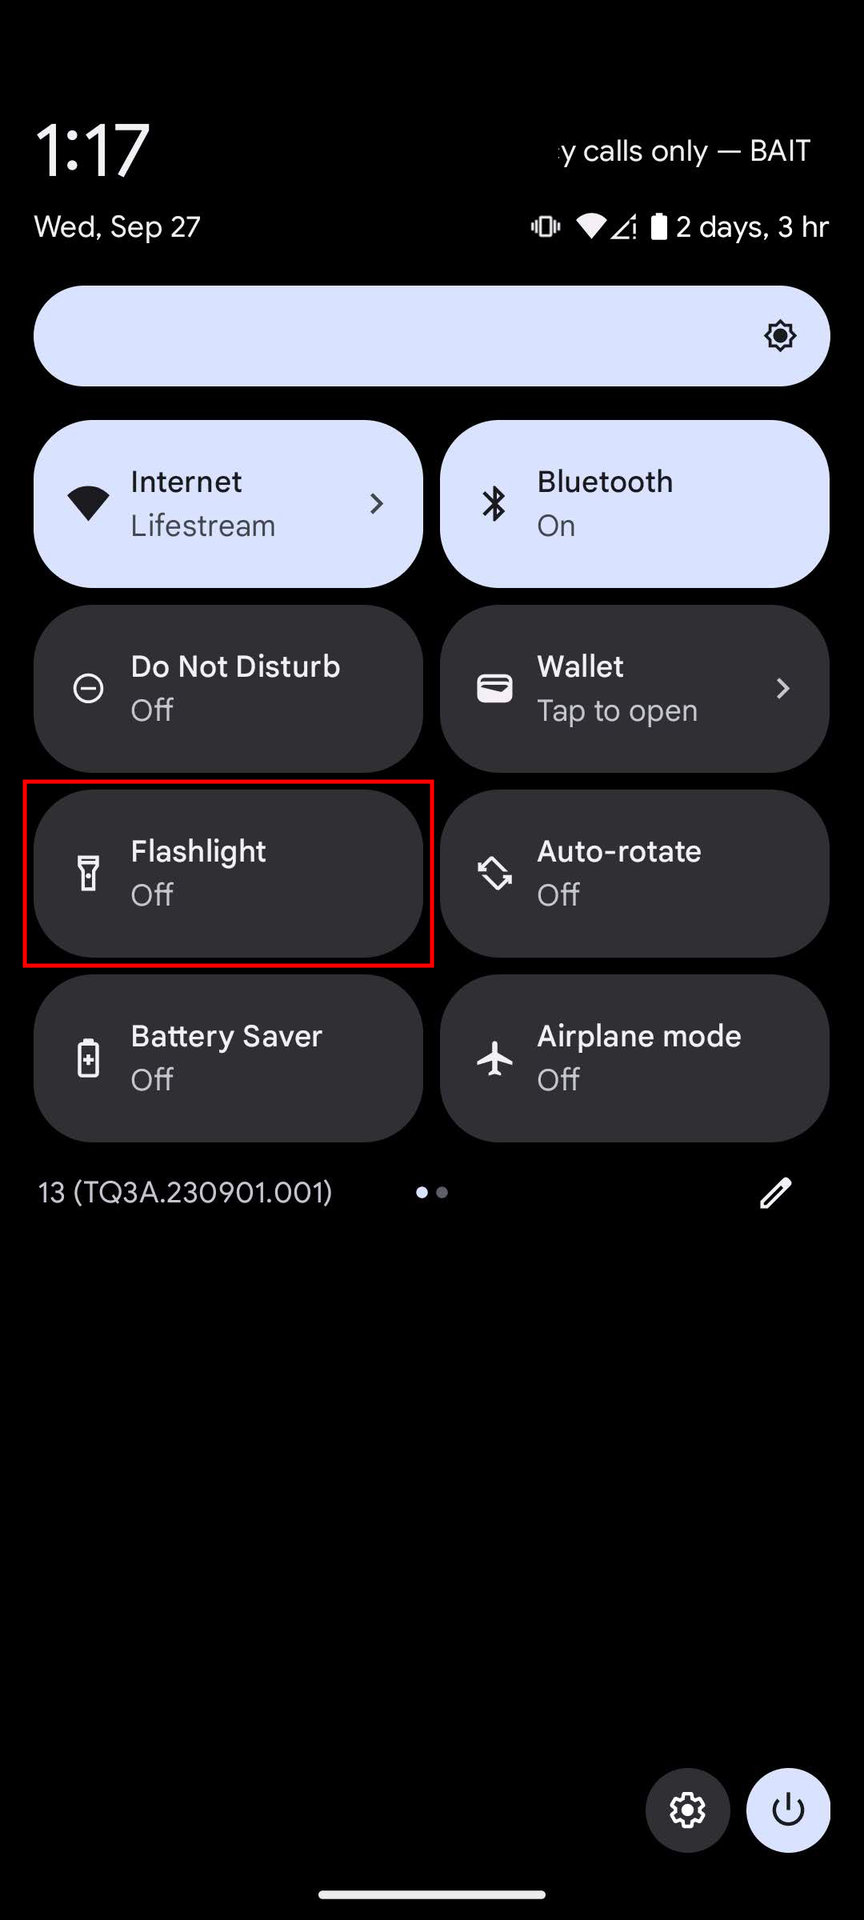 How to turn on the flashlight using Android Quick Settings (2)